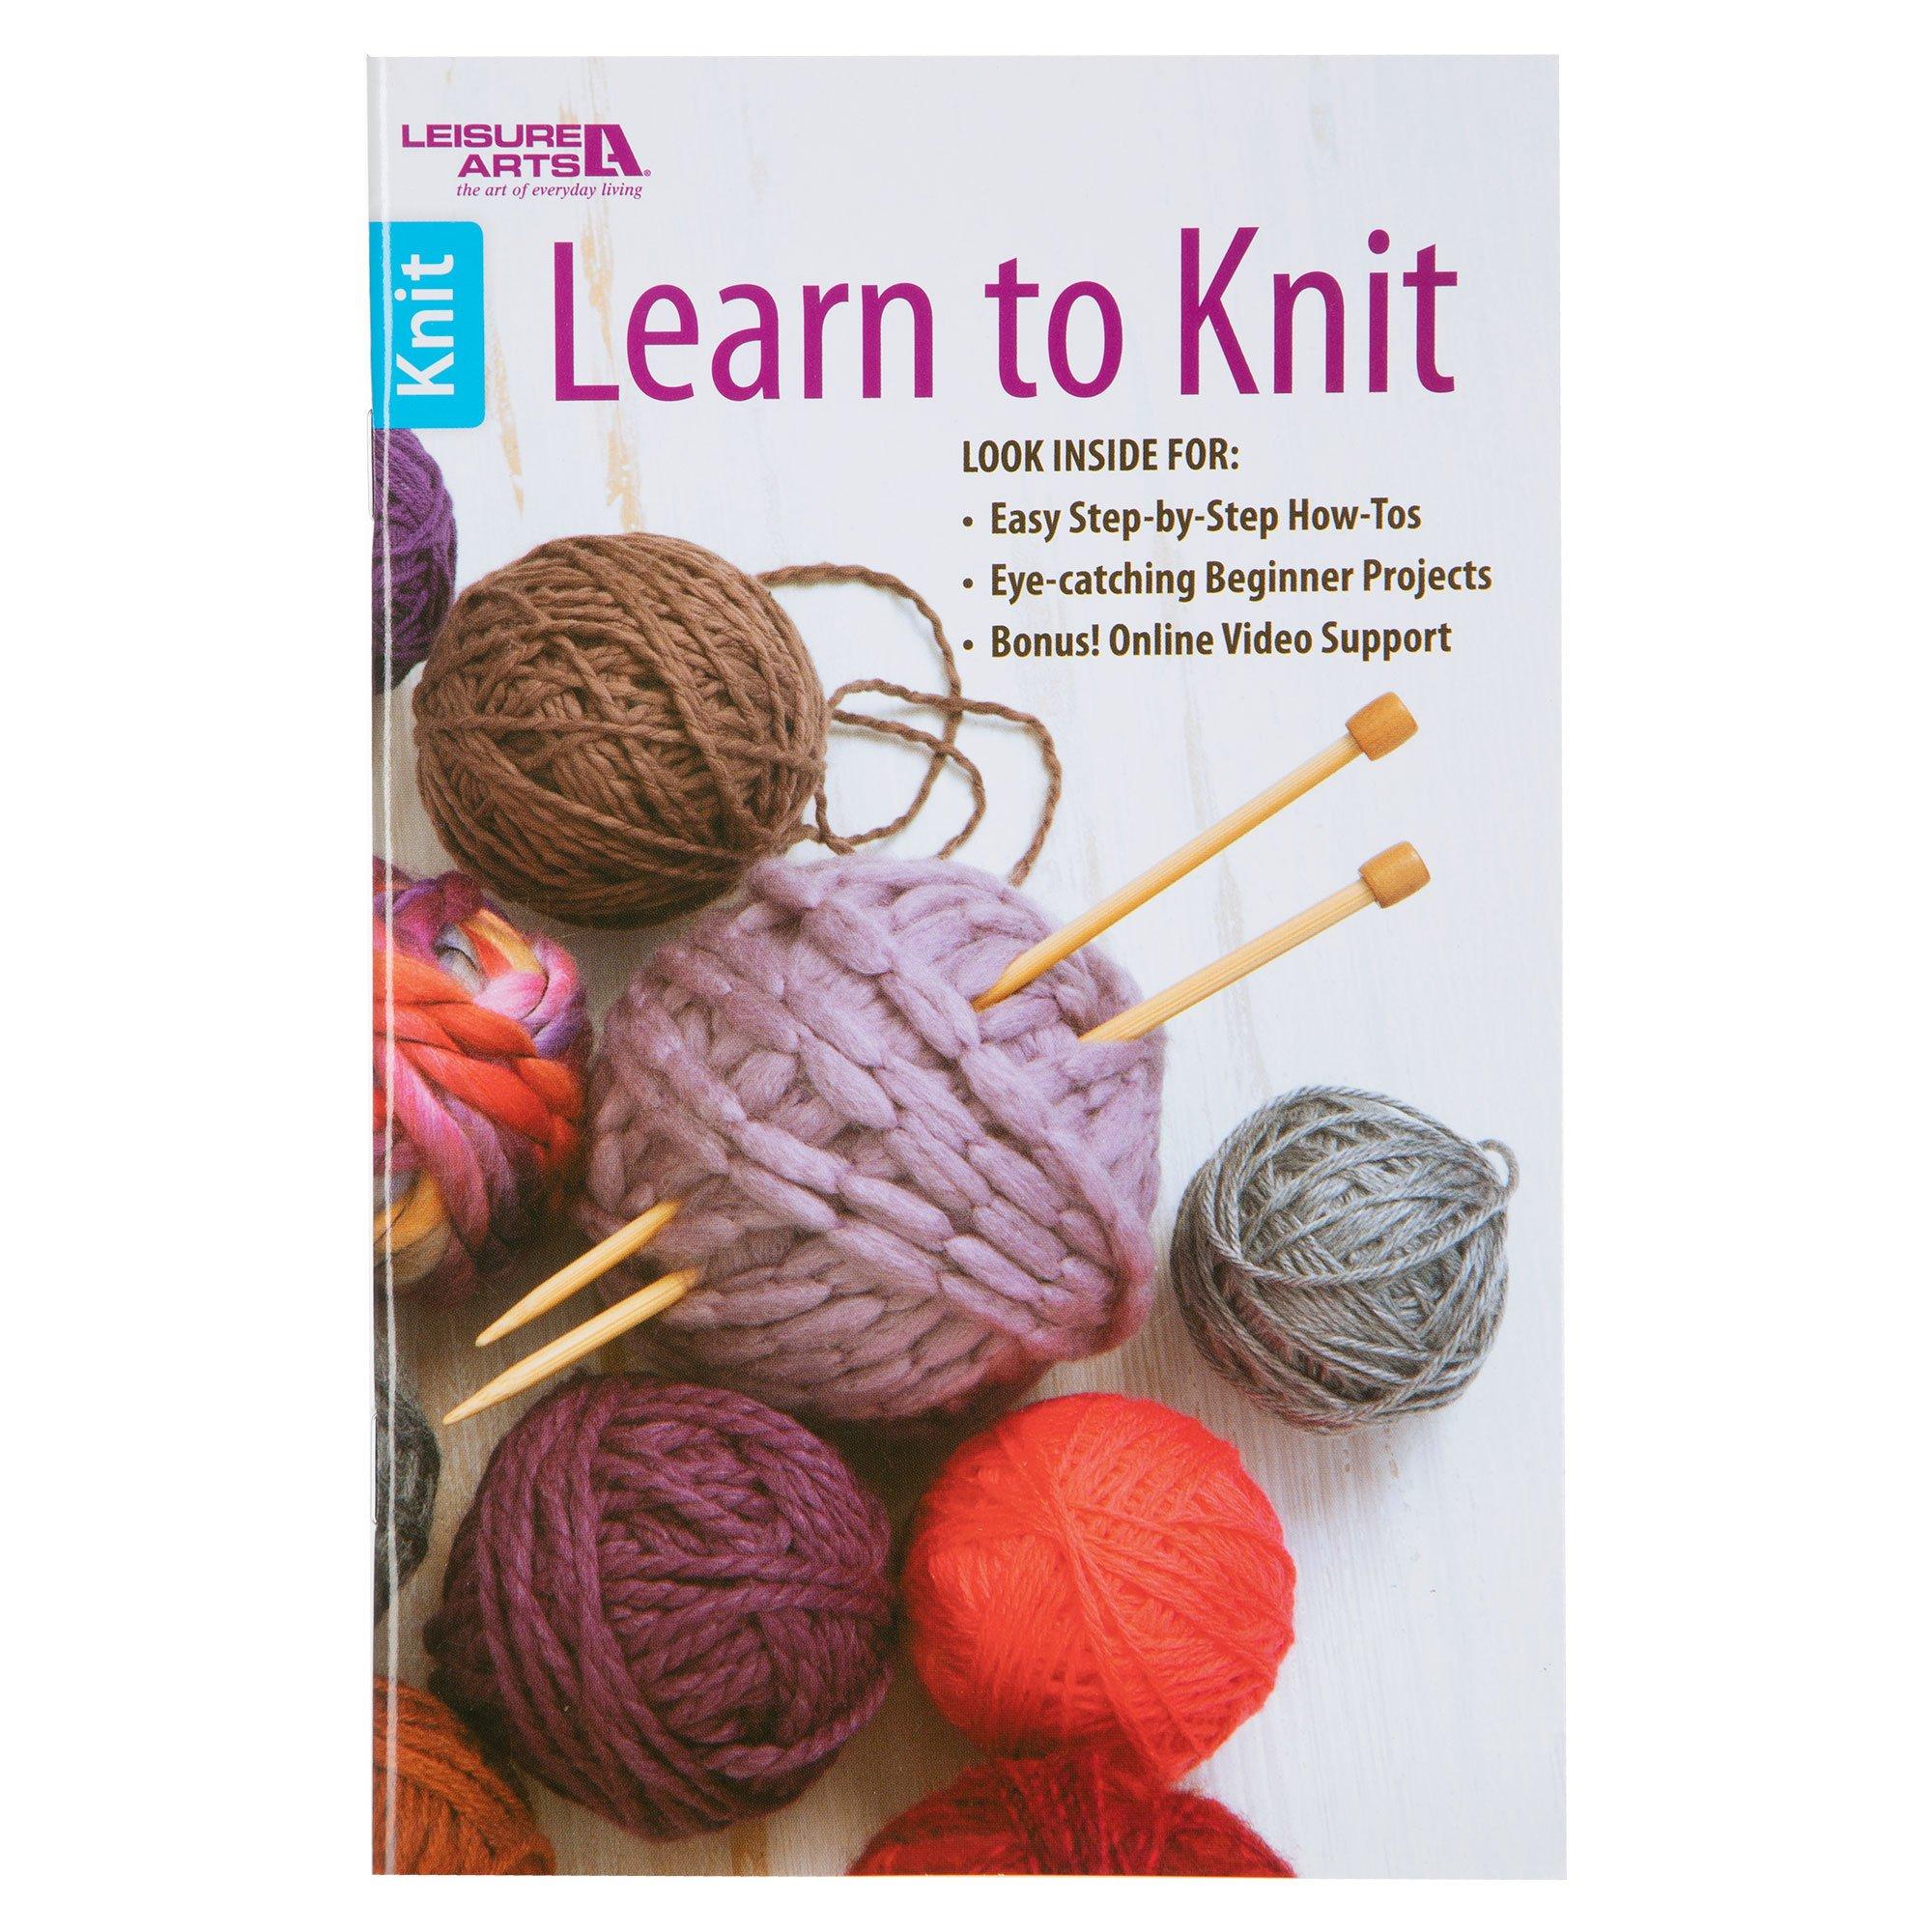 Knitting & Crochet For Beginners: The Complete Guide To Learn How To Knit &  Crochet With Step-By-Step Instructions, Clear Illustrations & Beginner Pat  (Paperback)